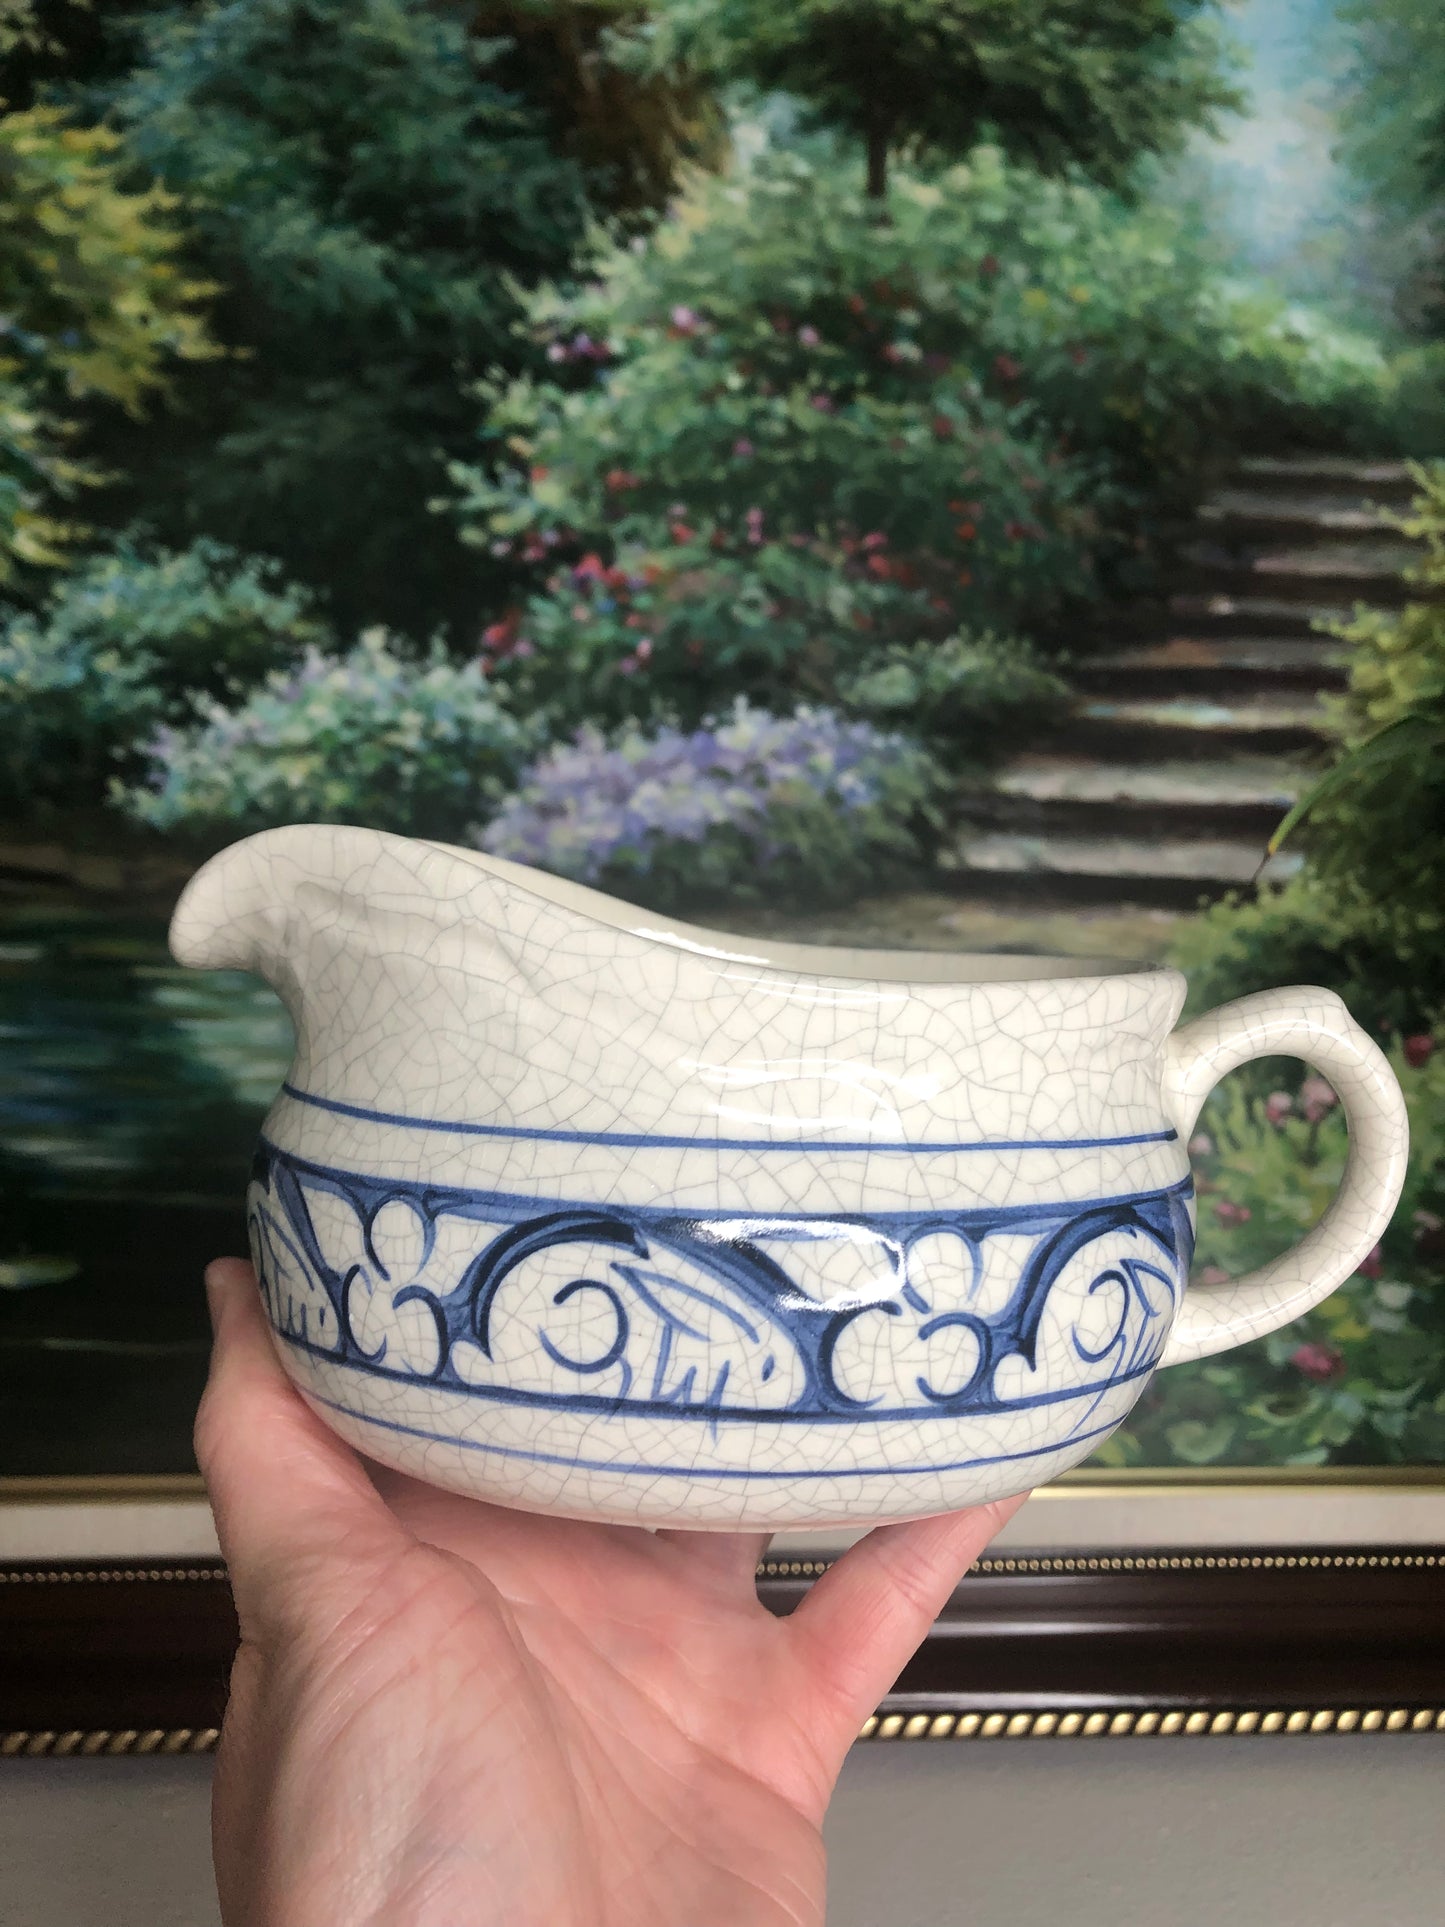 Vintage Dedham Pottery Bunny blue and white gravy boat - Excellent condition!